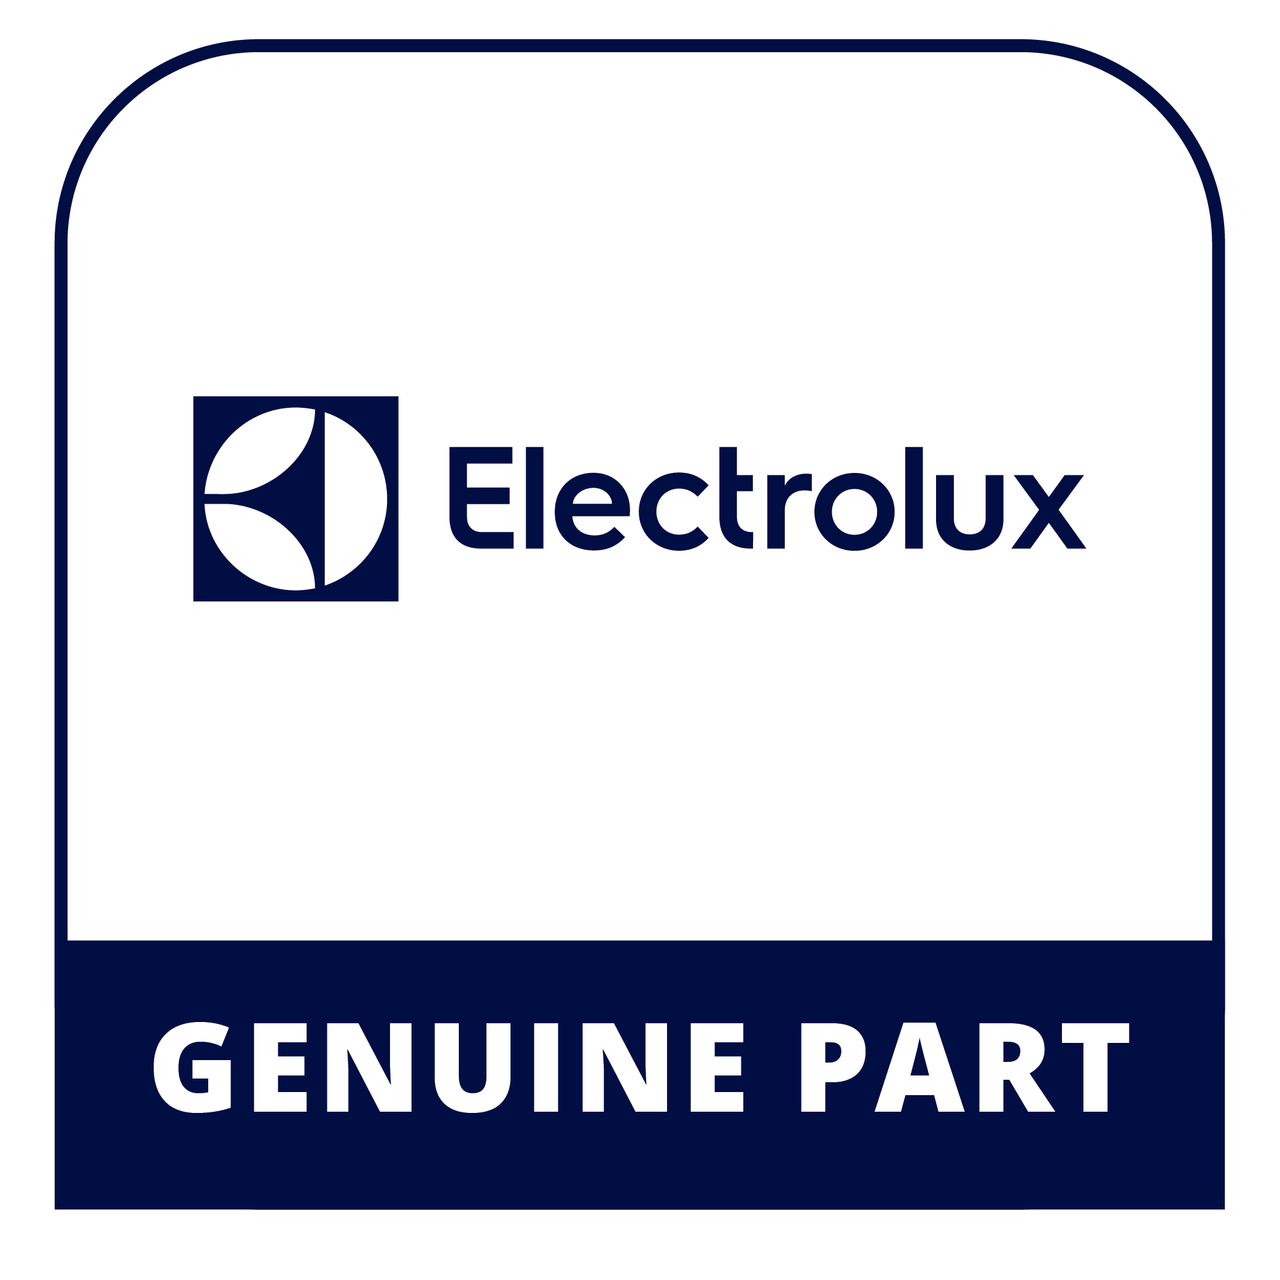 Frigidaire - Electrolux 137401000 Use & Care Guide - Genuine Electrolux Part